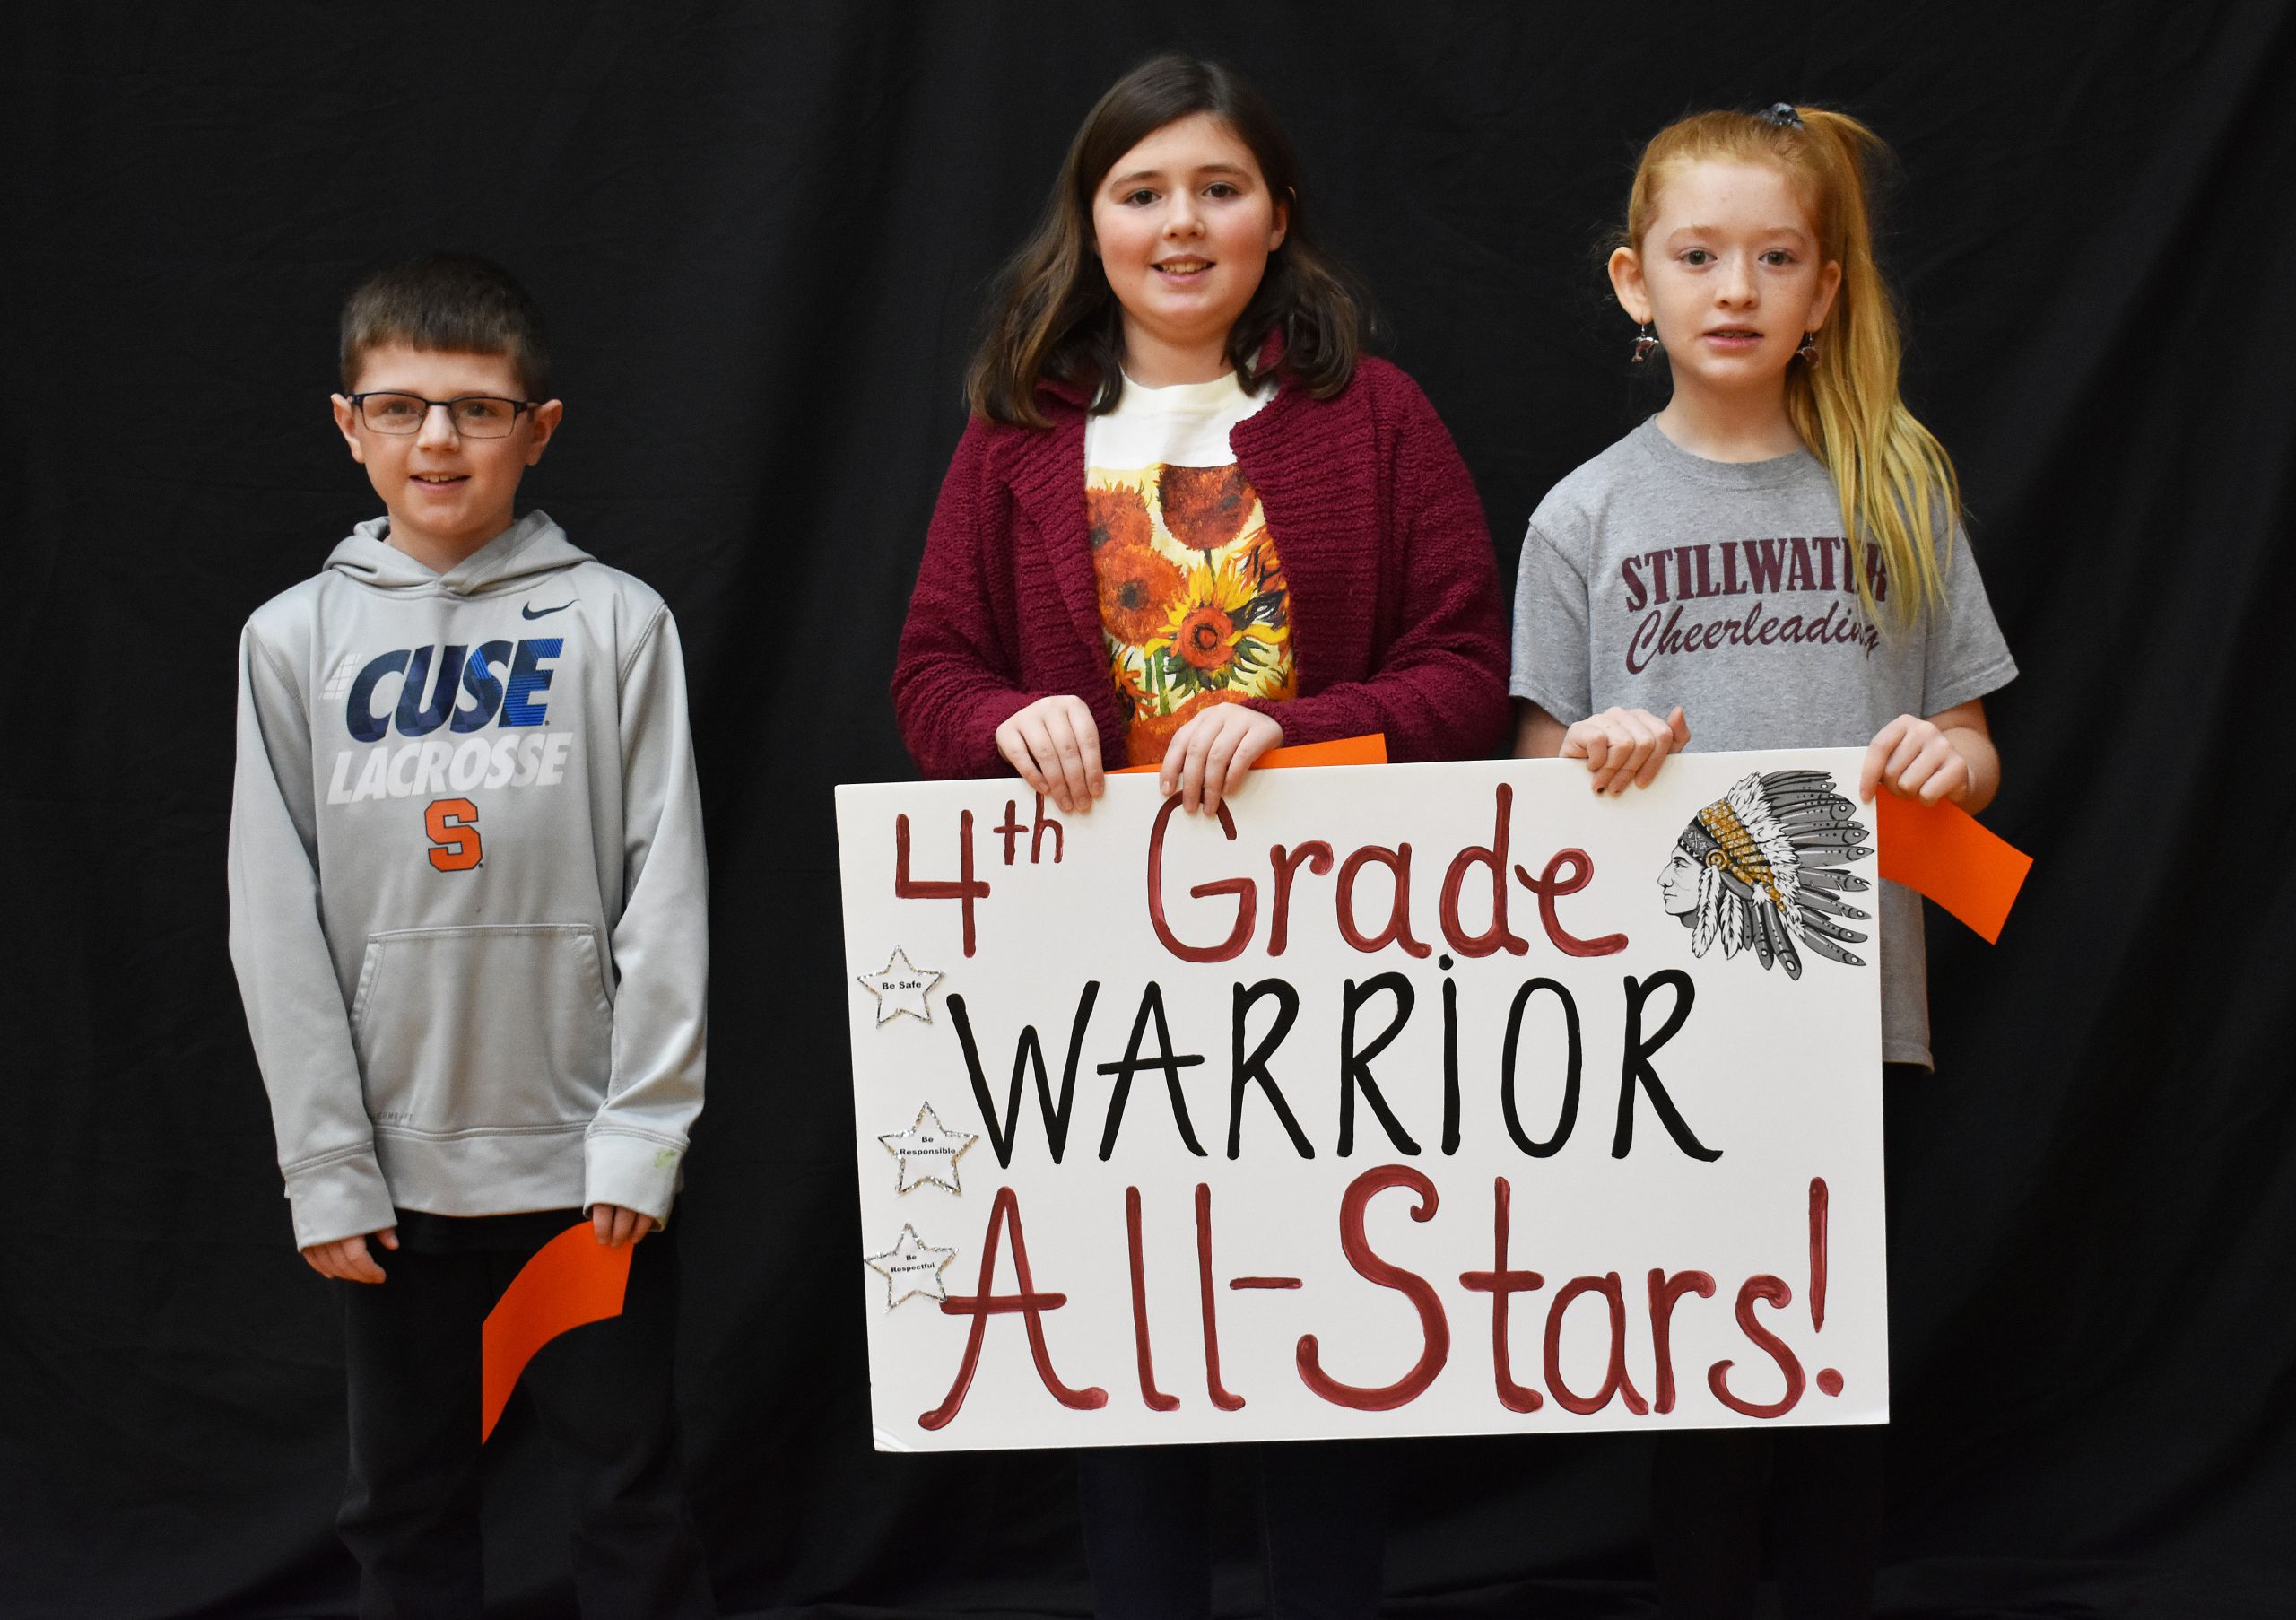 Students lined up with the fourth grade warrior sign